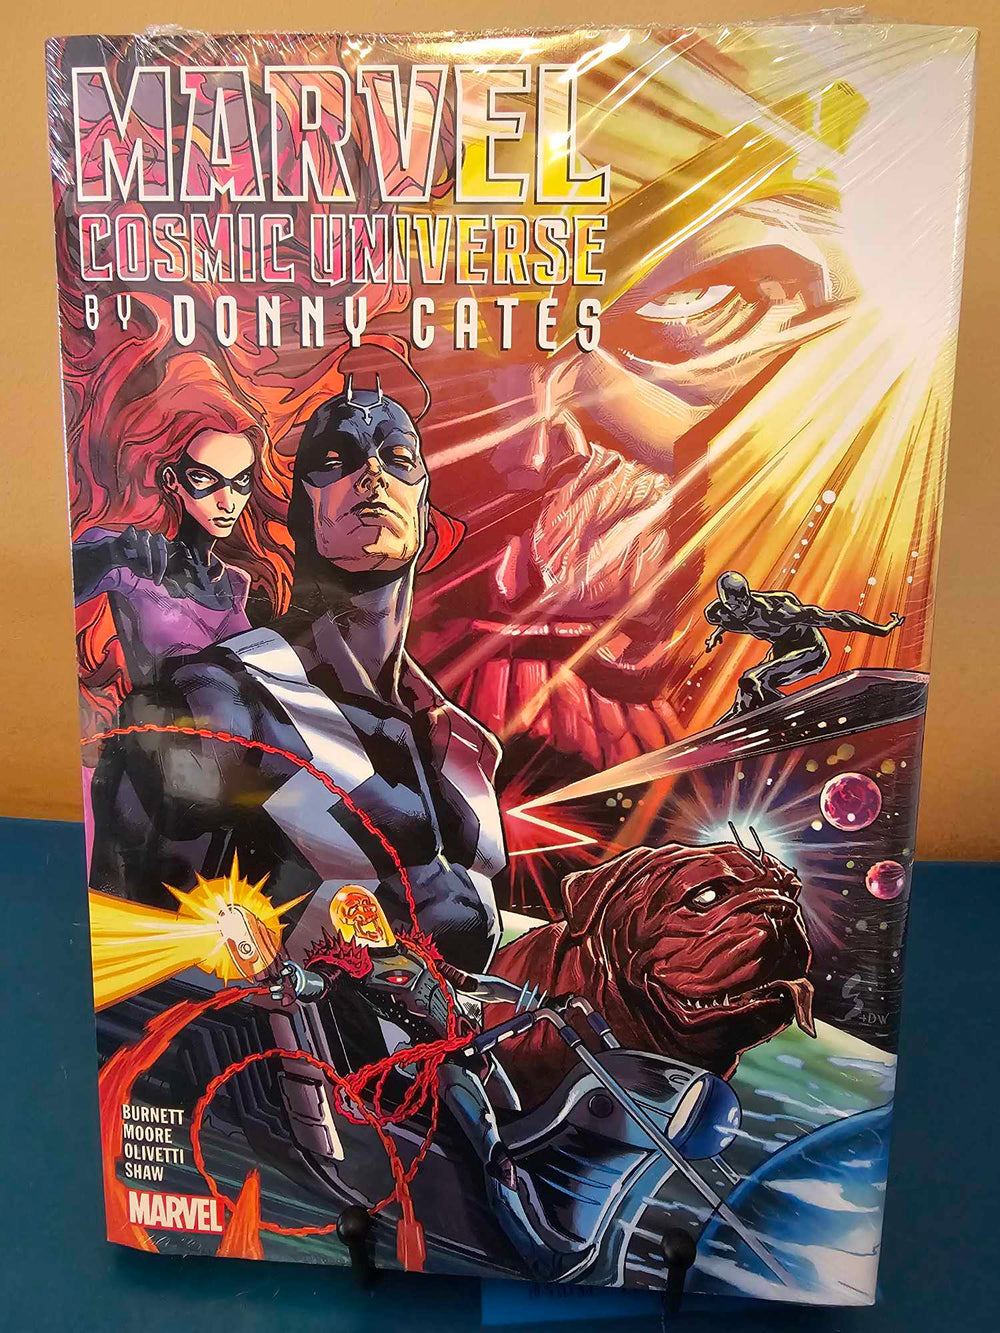 MARVEL COSMIC UNIVERSE BY DONNY CATES OMNIBUS VOL. 1